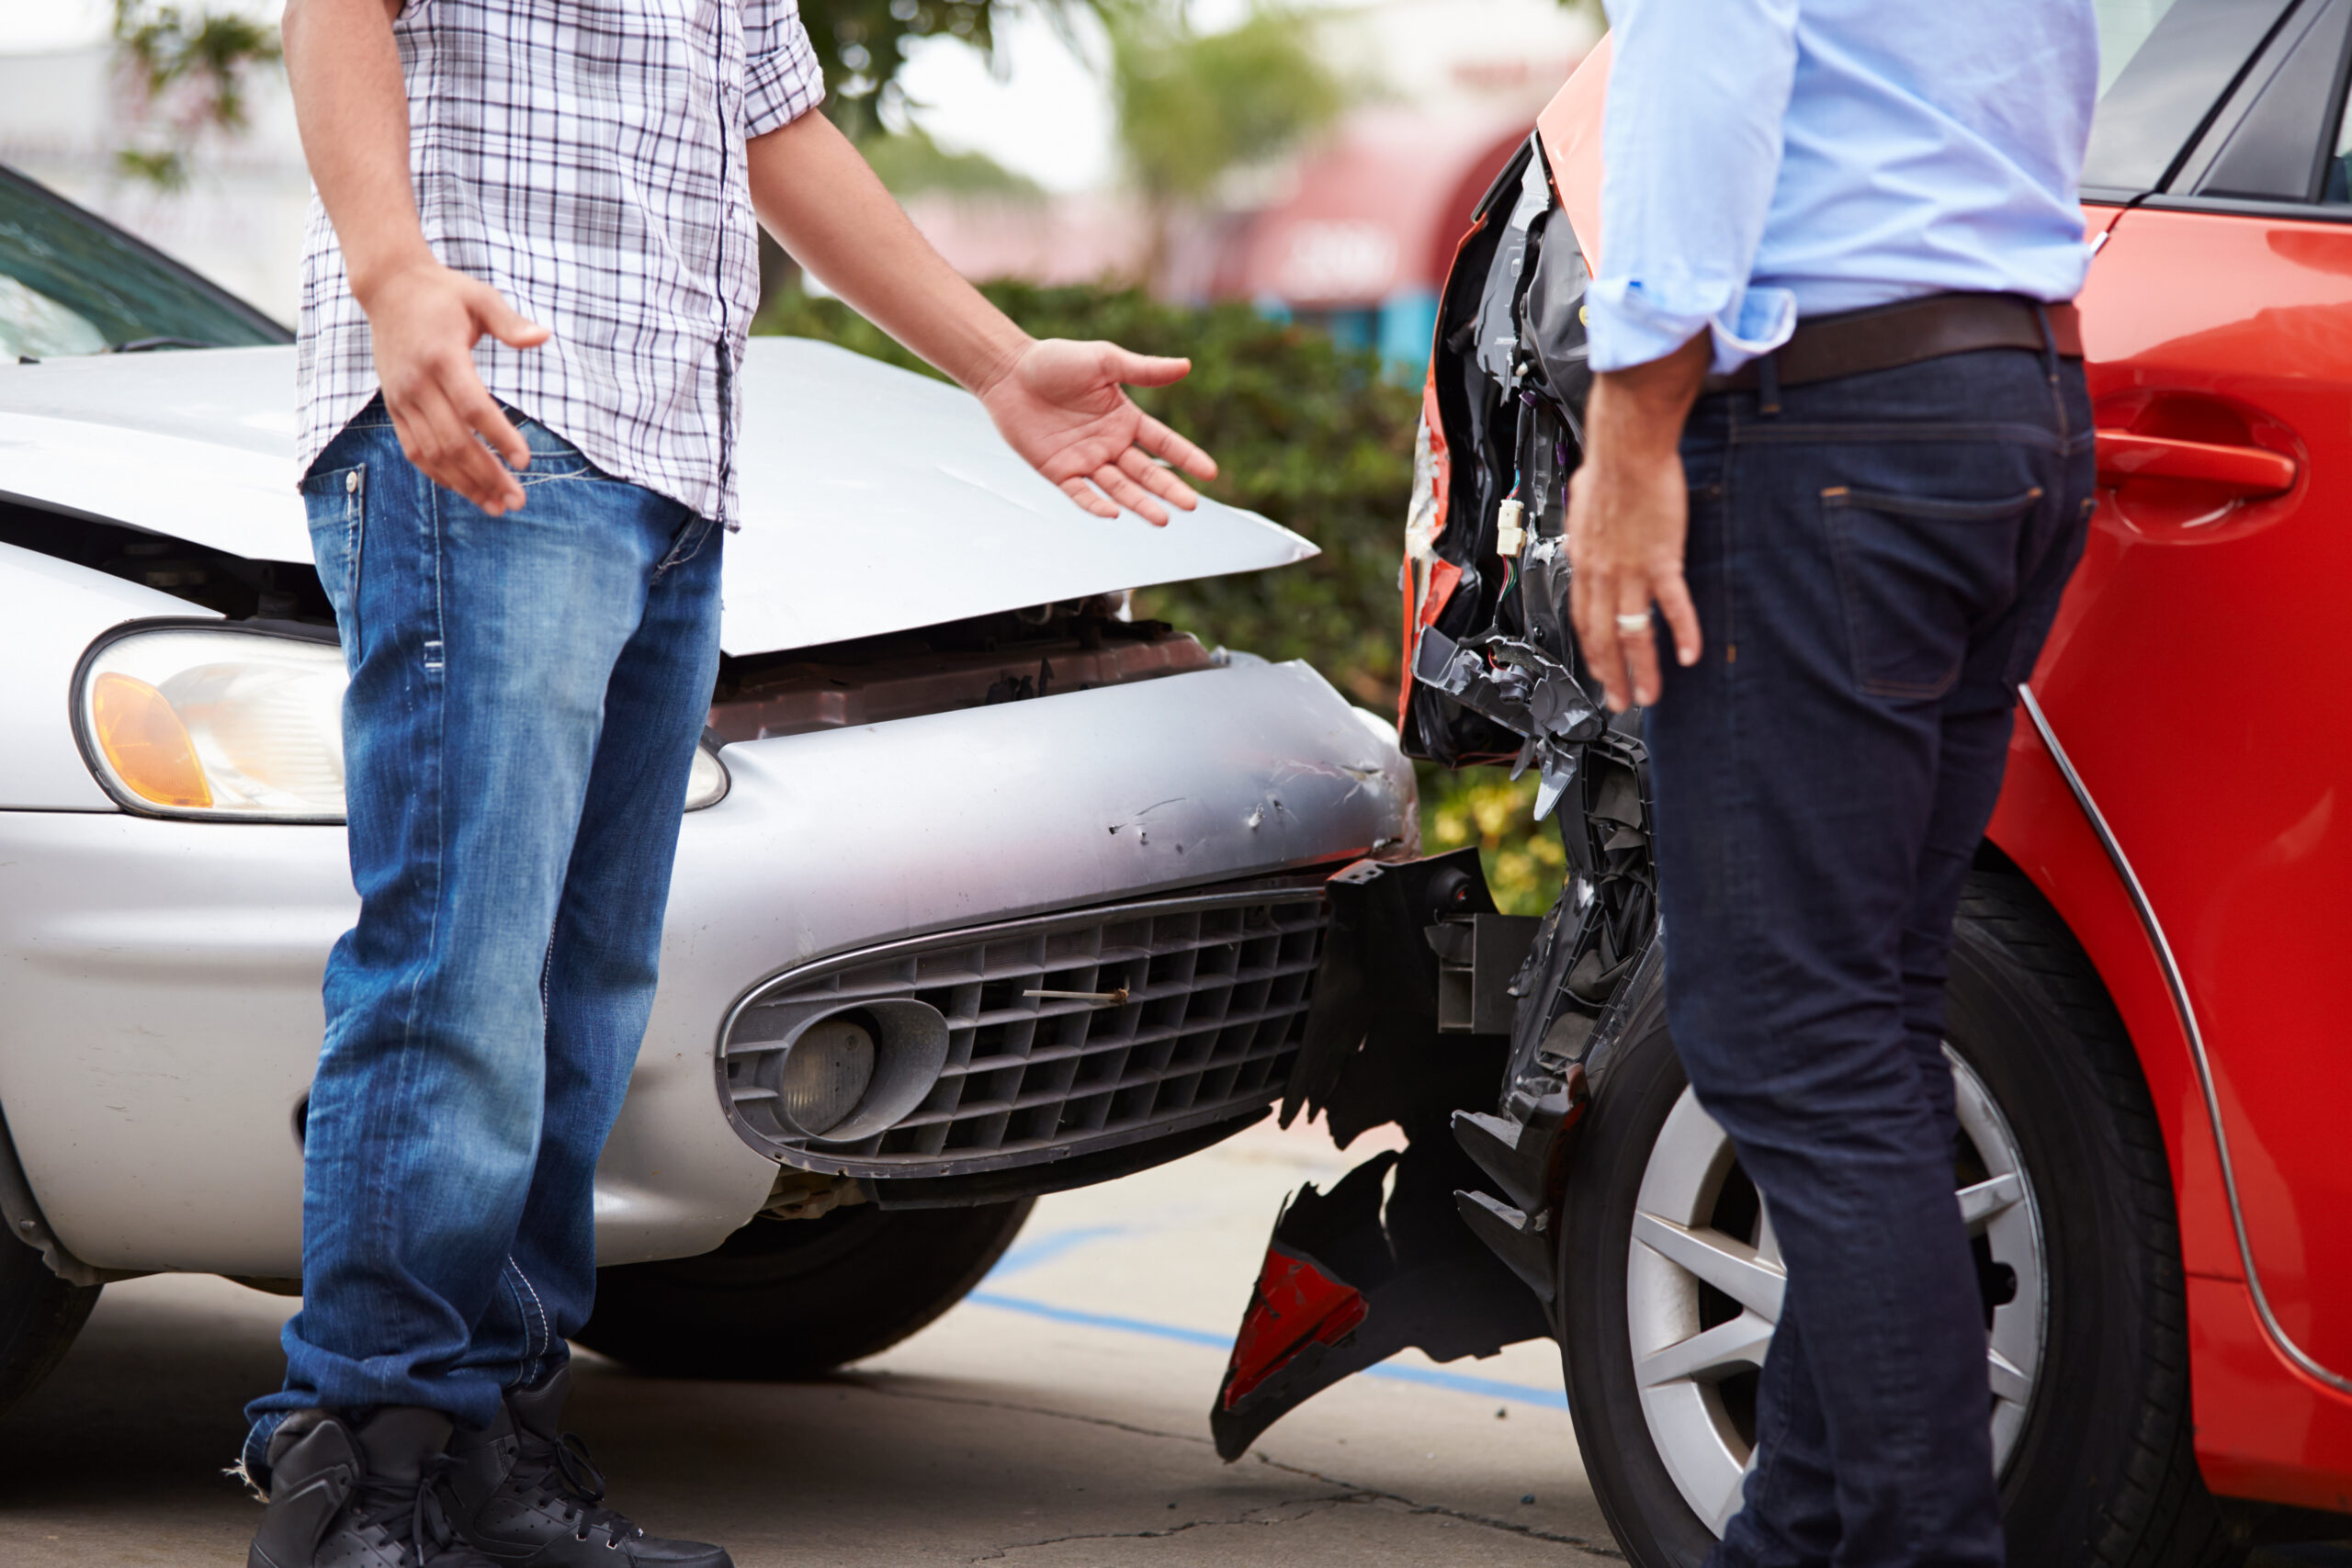 Steps to Take After a Car Accident in Alabama